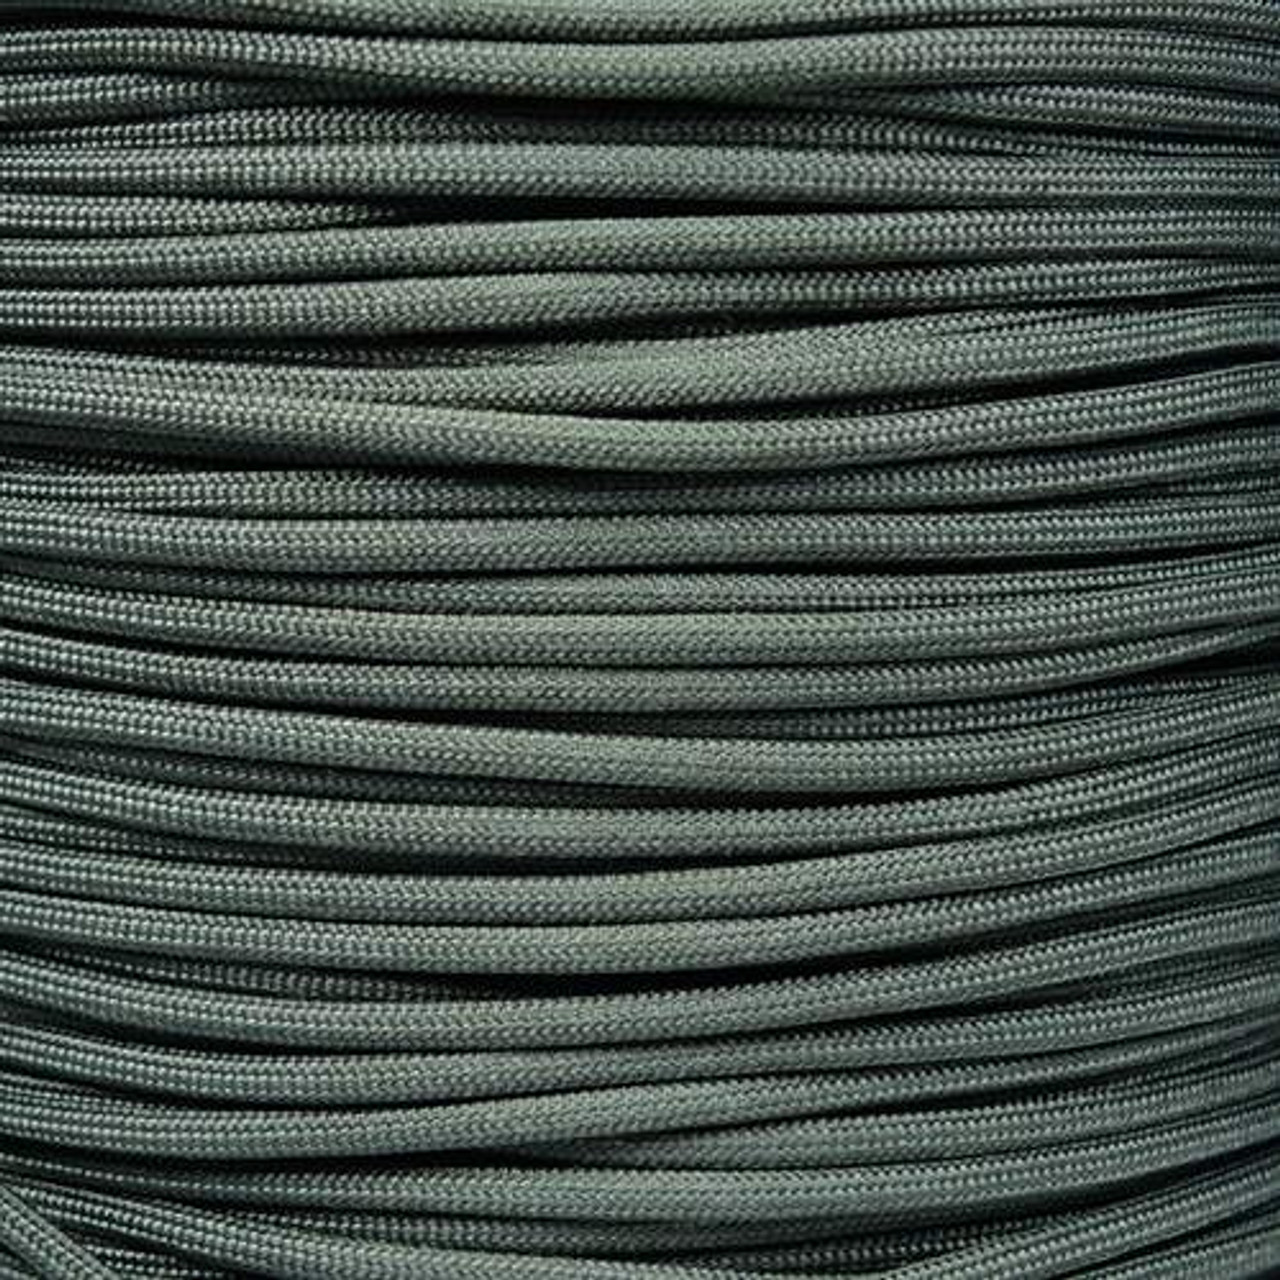 OD Green Paracord 1000 Ft Spool Mil Spec Outdoor Rope Parachute